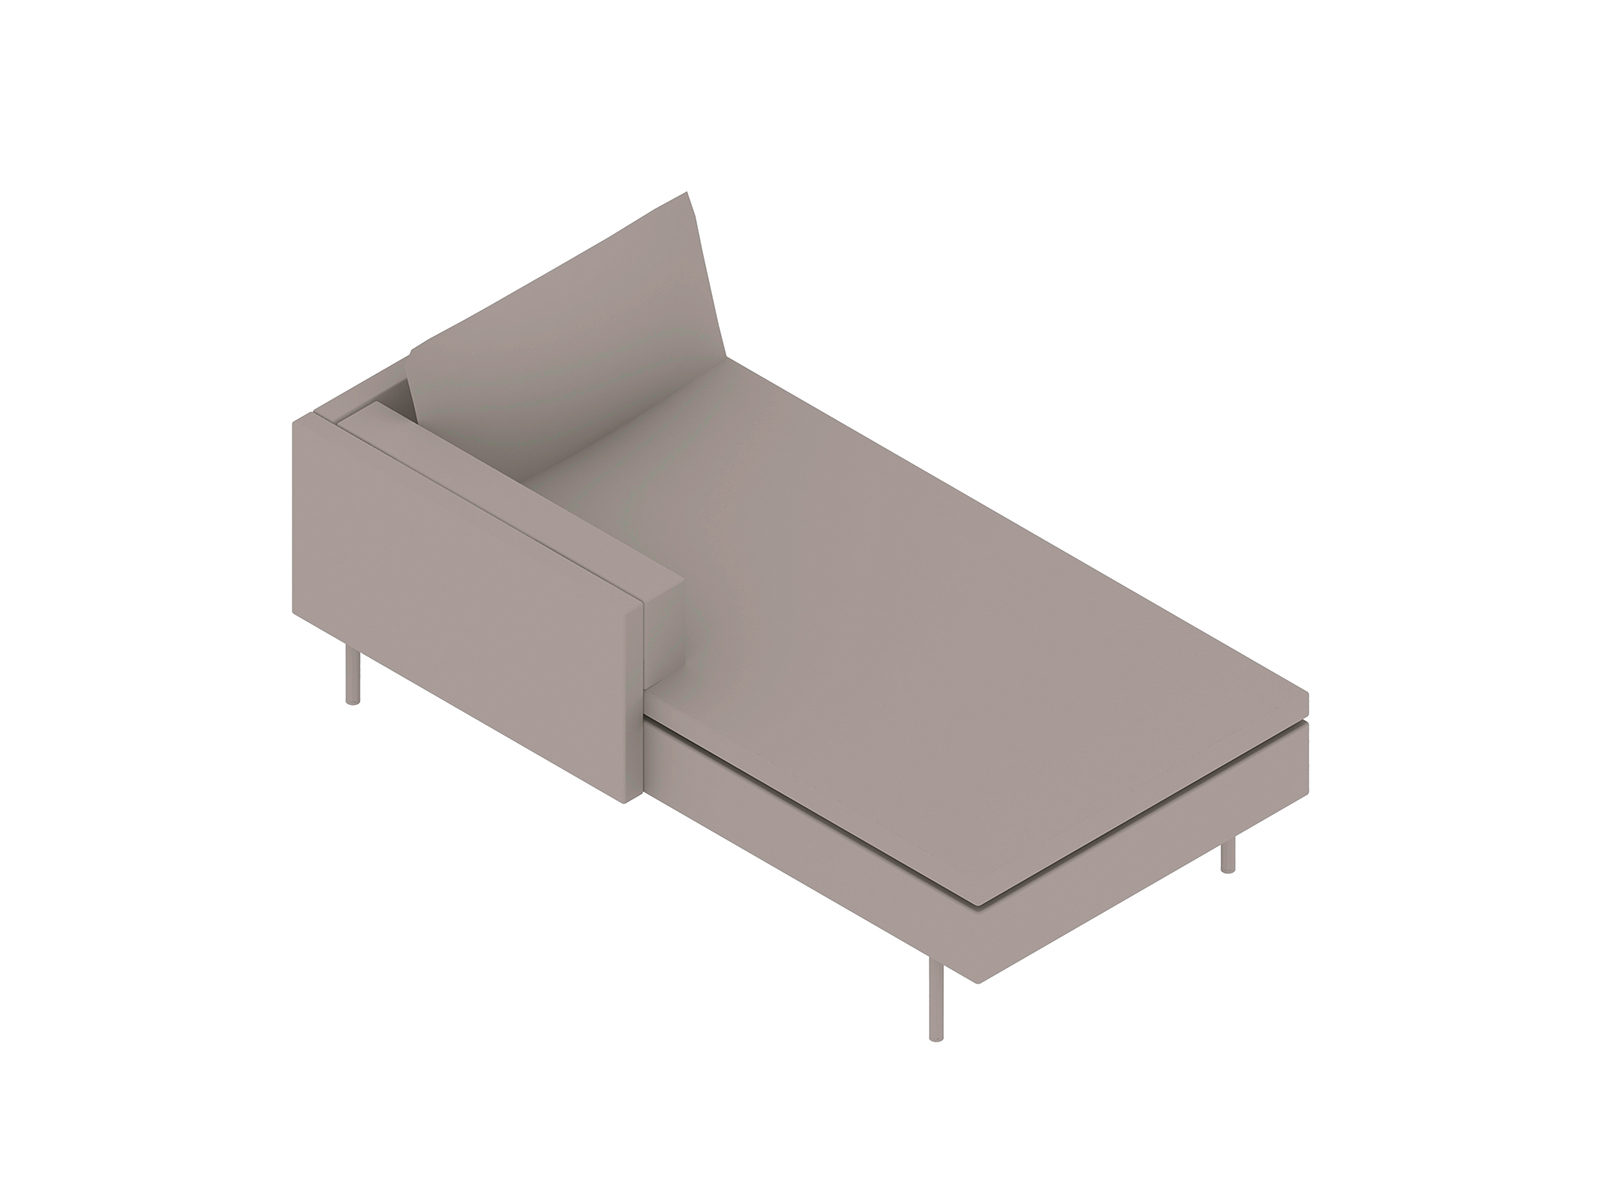 Un rendering generico - Chaise Bolster